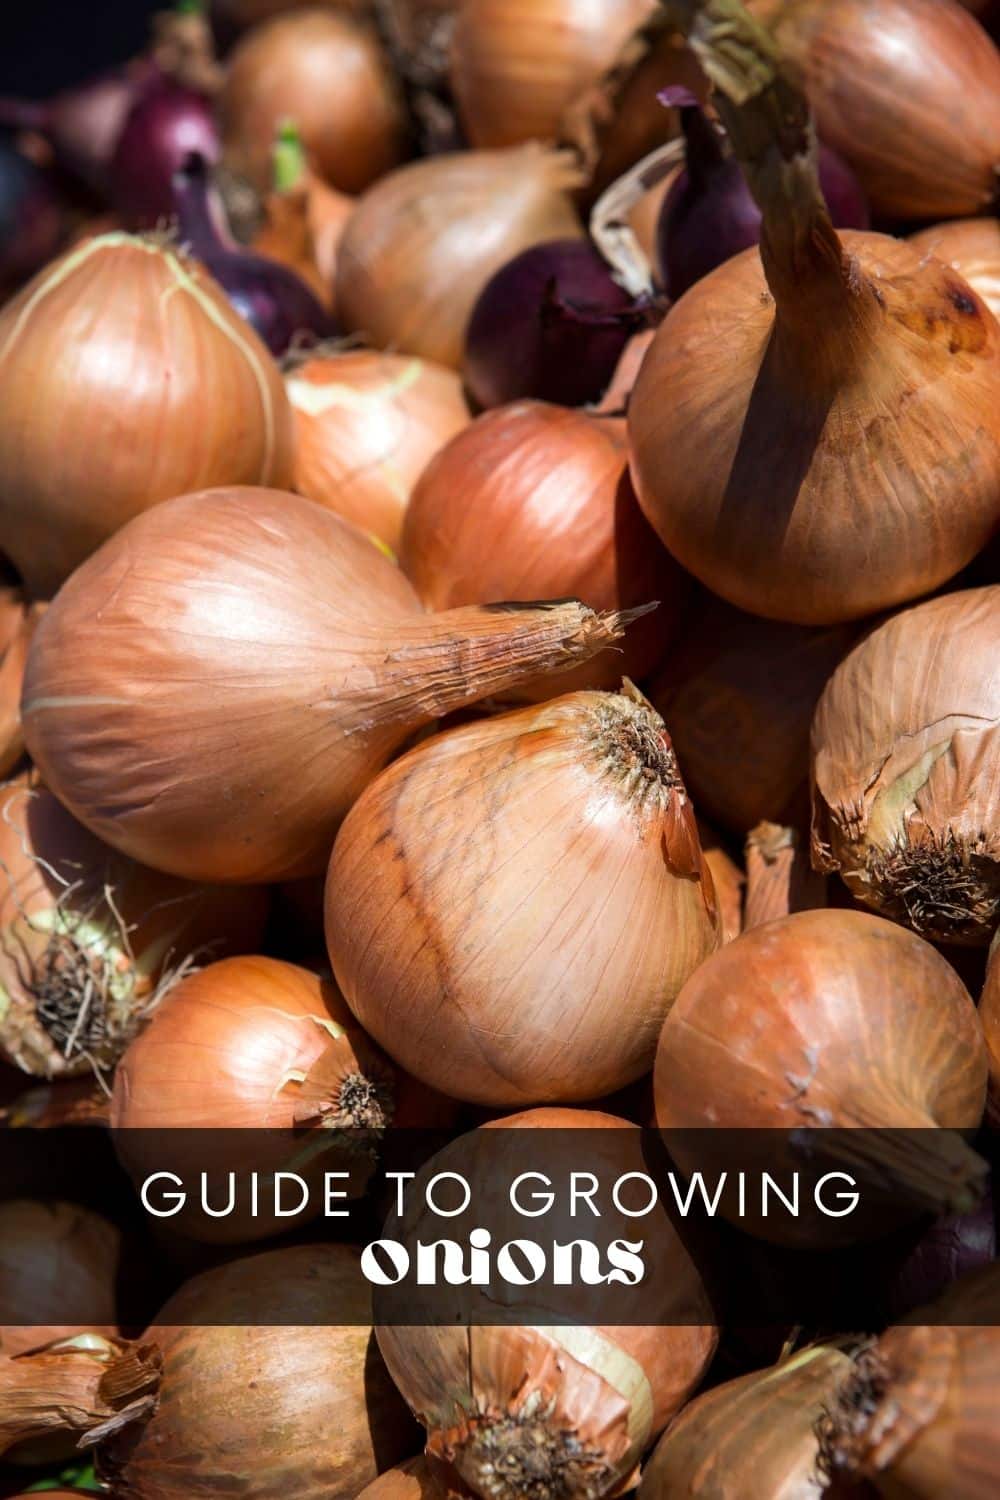 If you're looking for a low-maintenance crop that won't take up much space, onions are a great choice. There are many onion varieties to choose from, and you can grow them from seeds, sets, or transplants. But before you begin planting, there are a few things to consider.